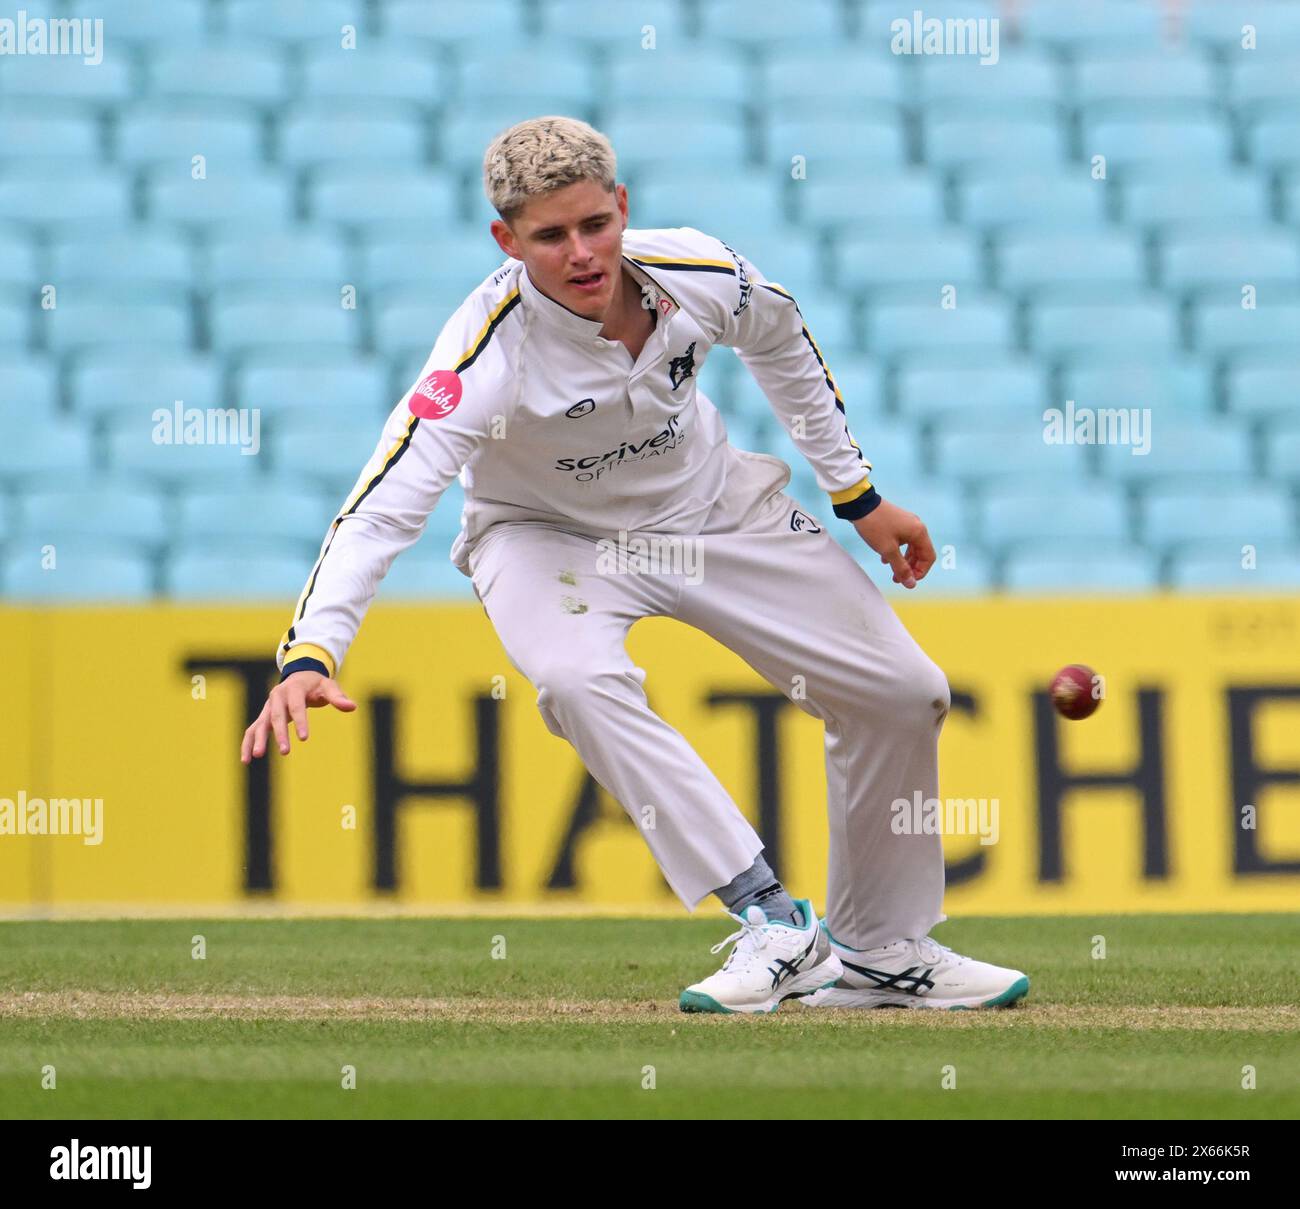 Oval, England. 13 May, 2024. Jacob Bethell of Warwickshire County Cricket Club during the Vitality County Championship match between Surrey CCC and Warwickshire CCC. Credit: Nigel Bramley/Alamy Live News Stock Photo